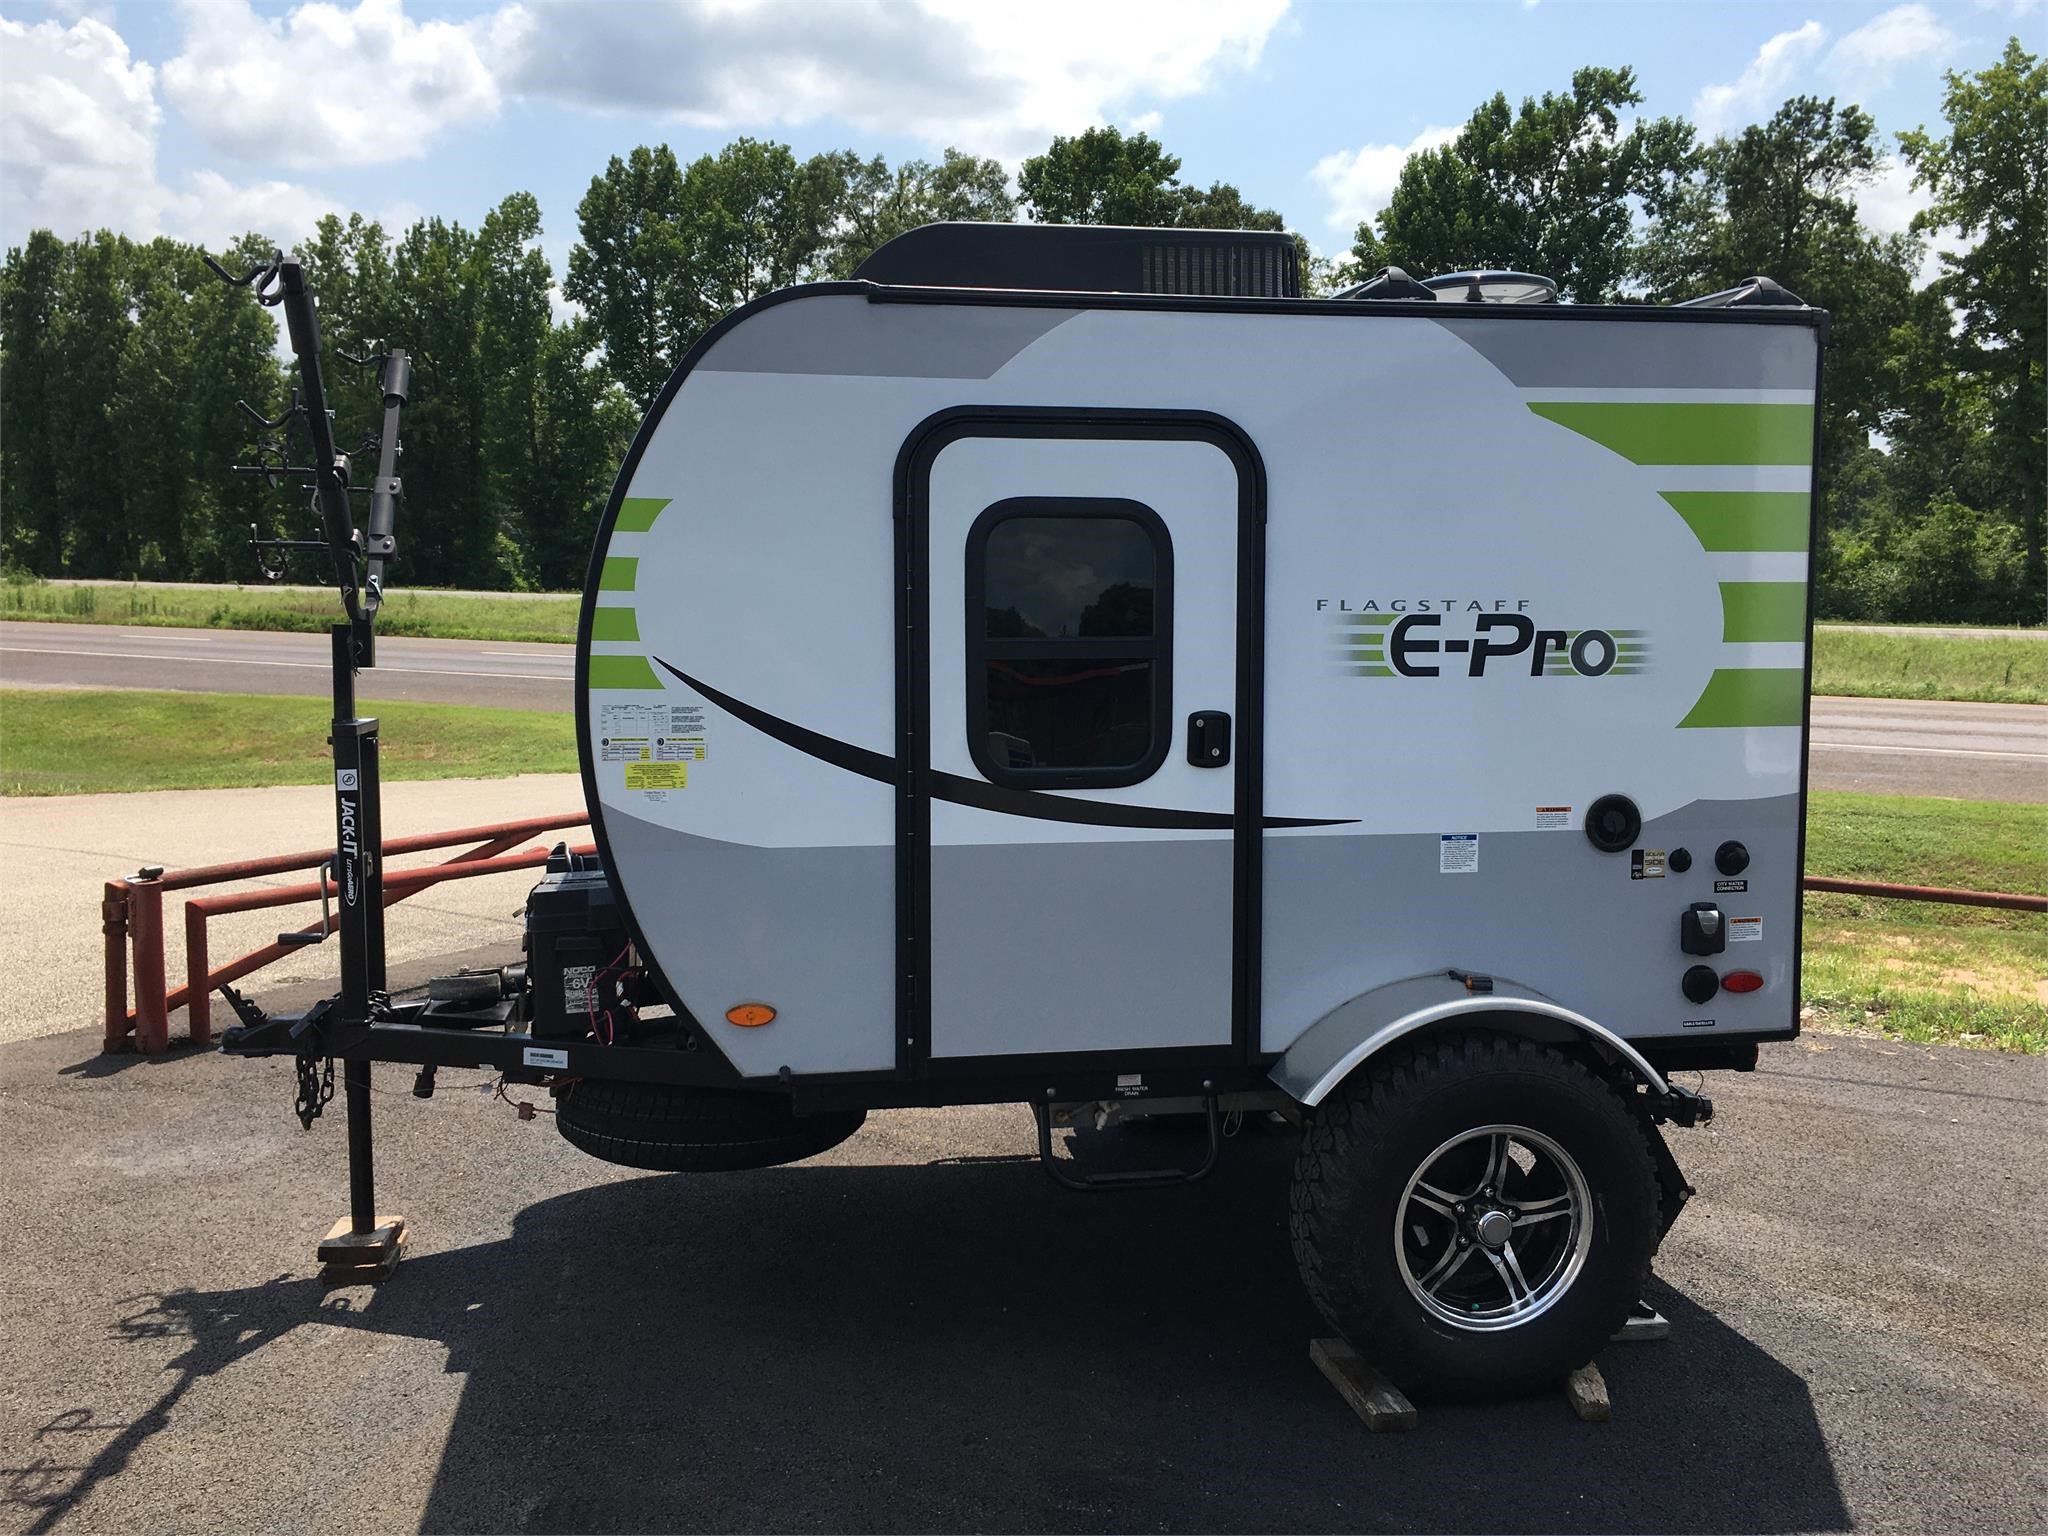 2019 FOREST RIVER FLAGSTAFF E-PRO 12RK For Sale in Nacogdoches, Texas | www.qualityrvservice.net 2019 Forest River Flagstaff E Pro 12rk